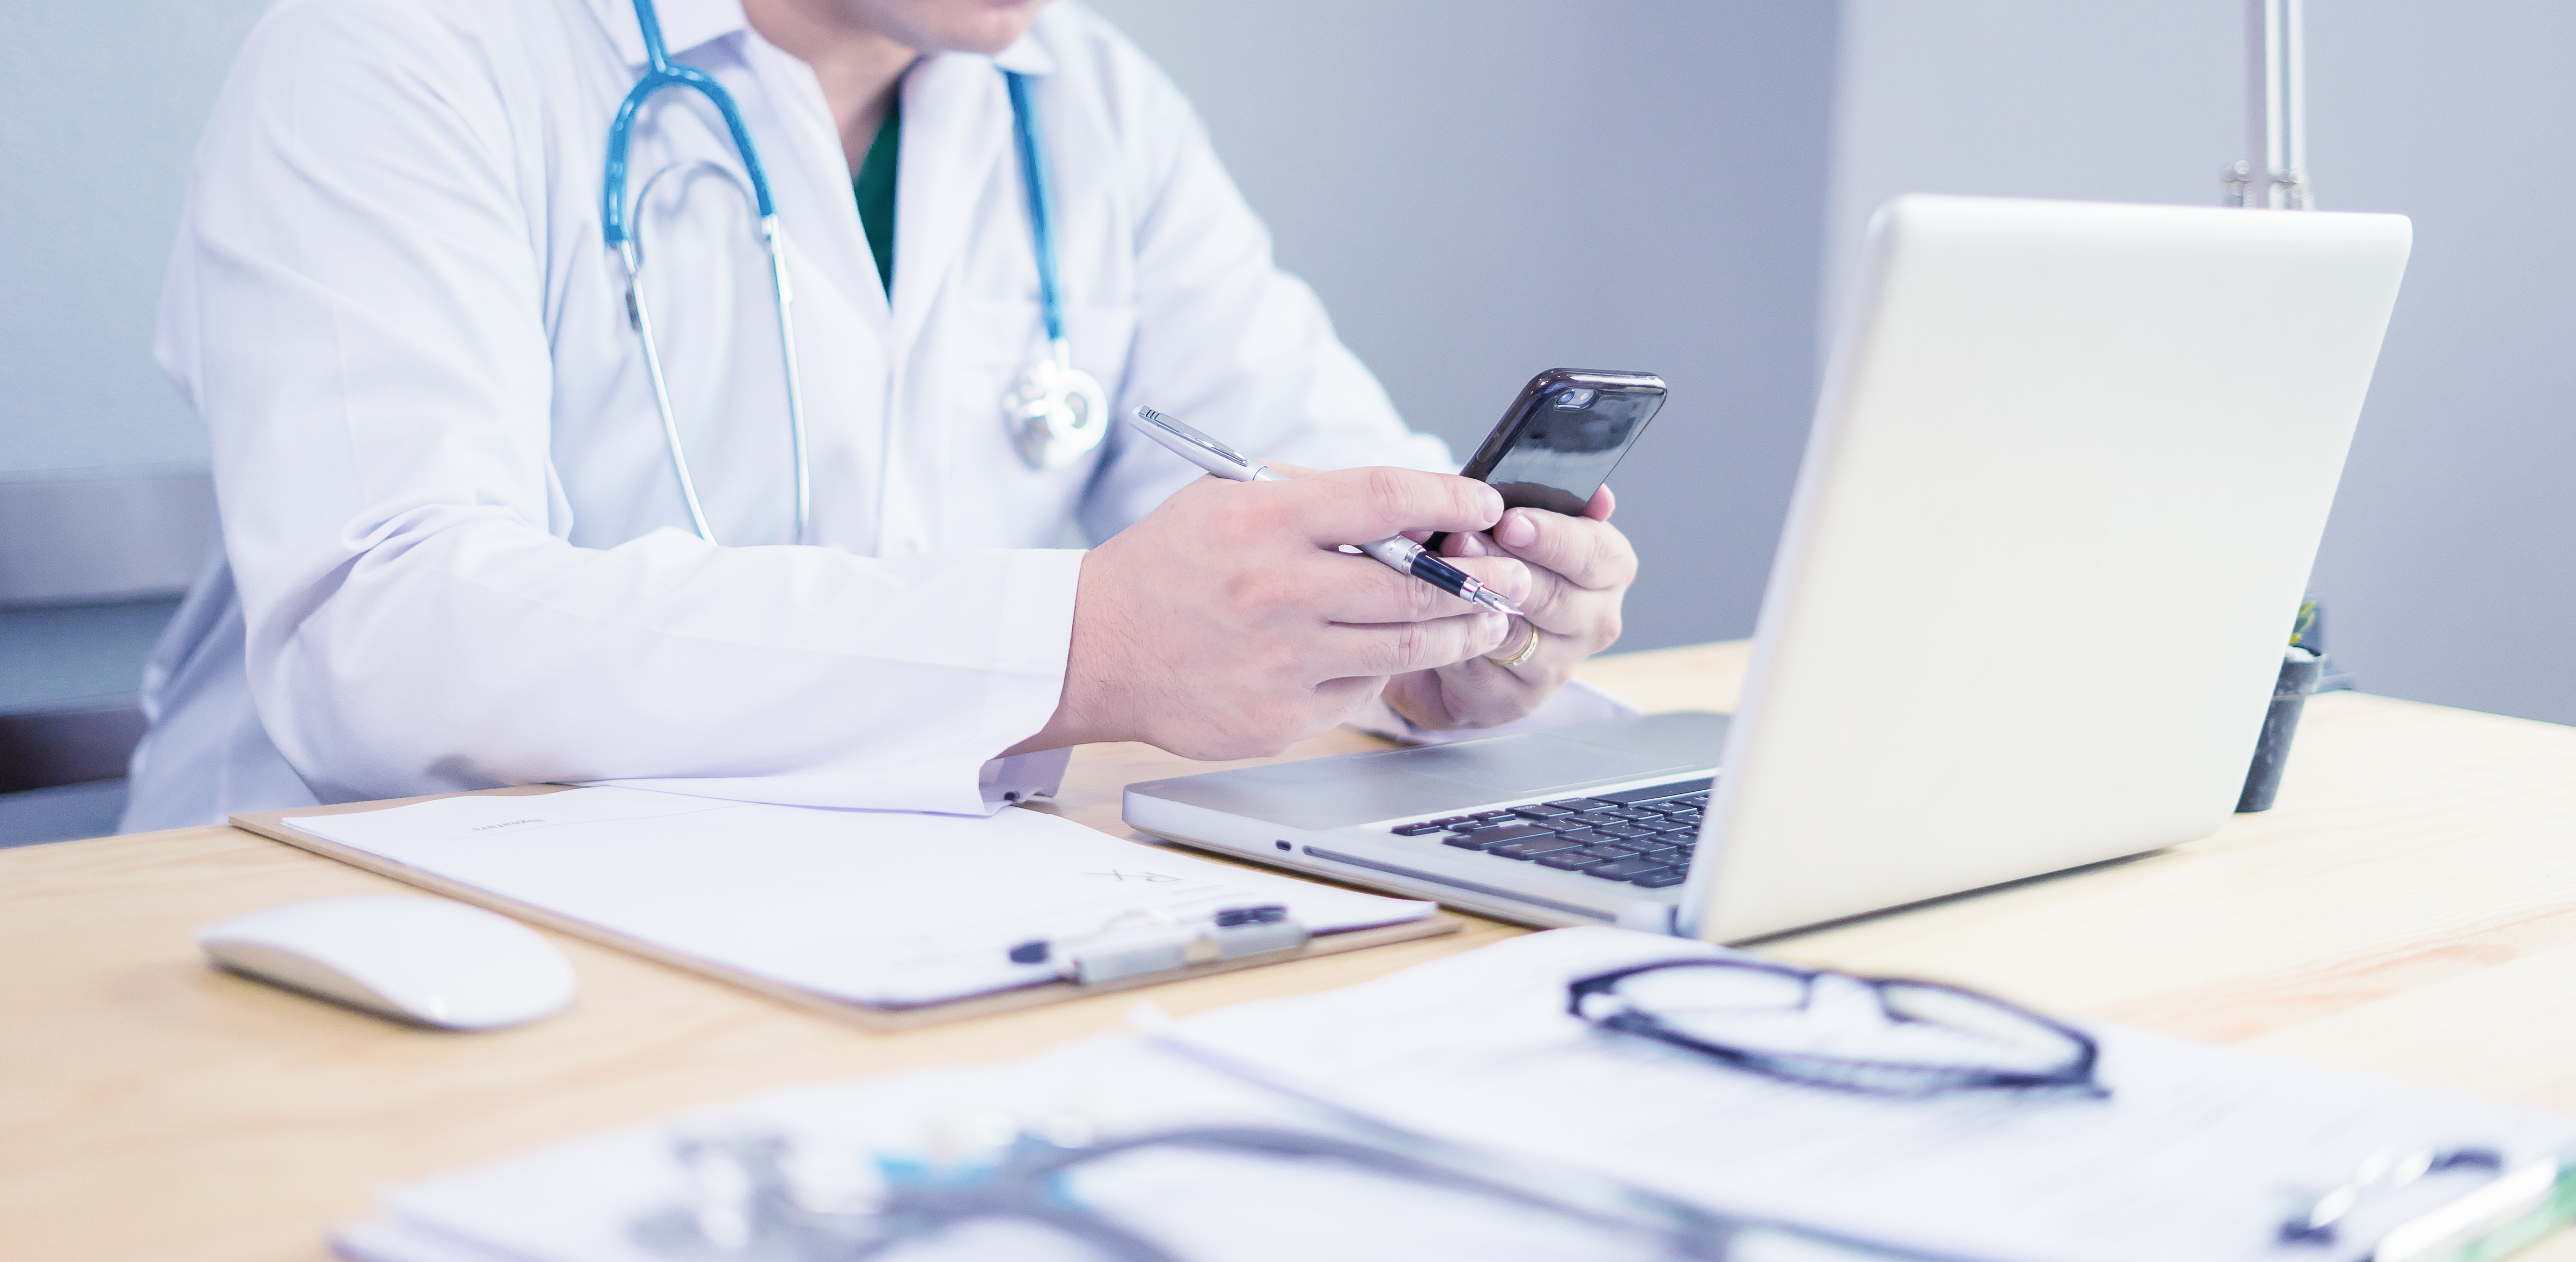 Mobile Marketing for Healthcare Professionals